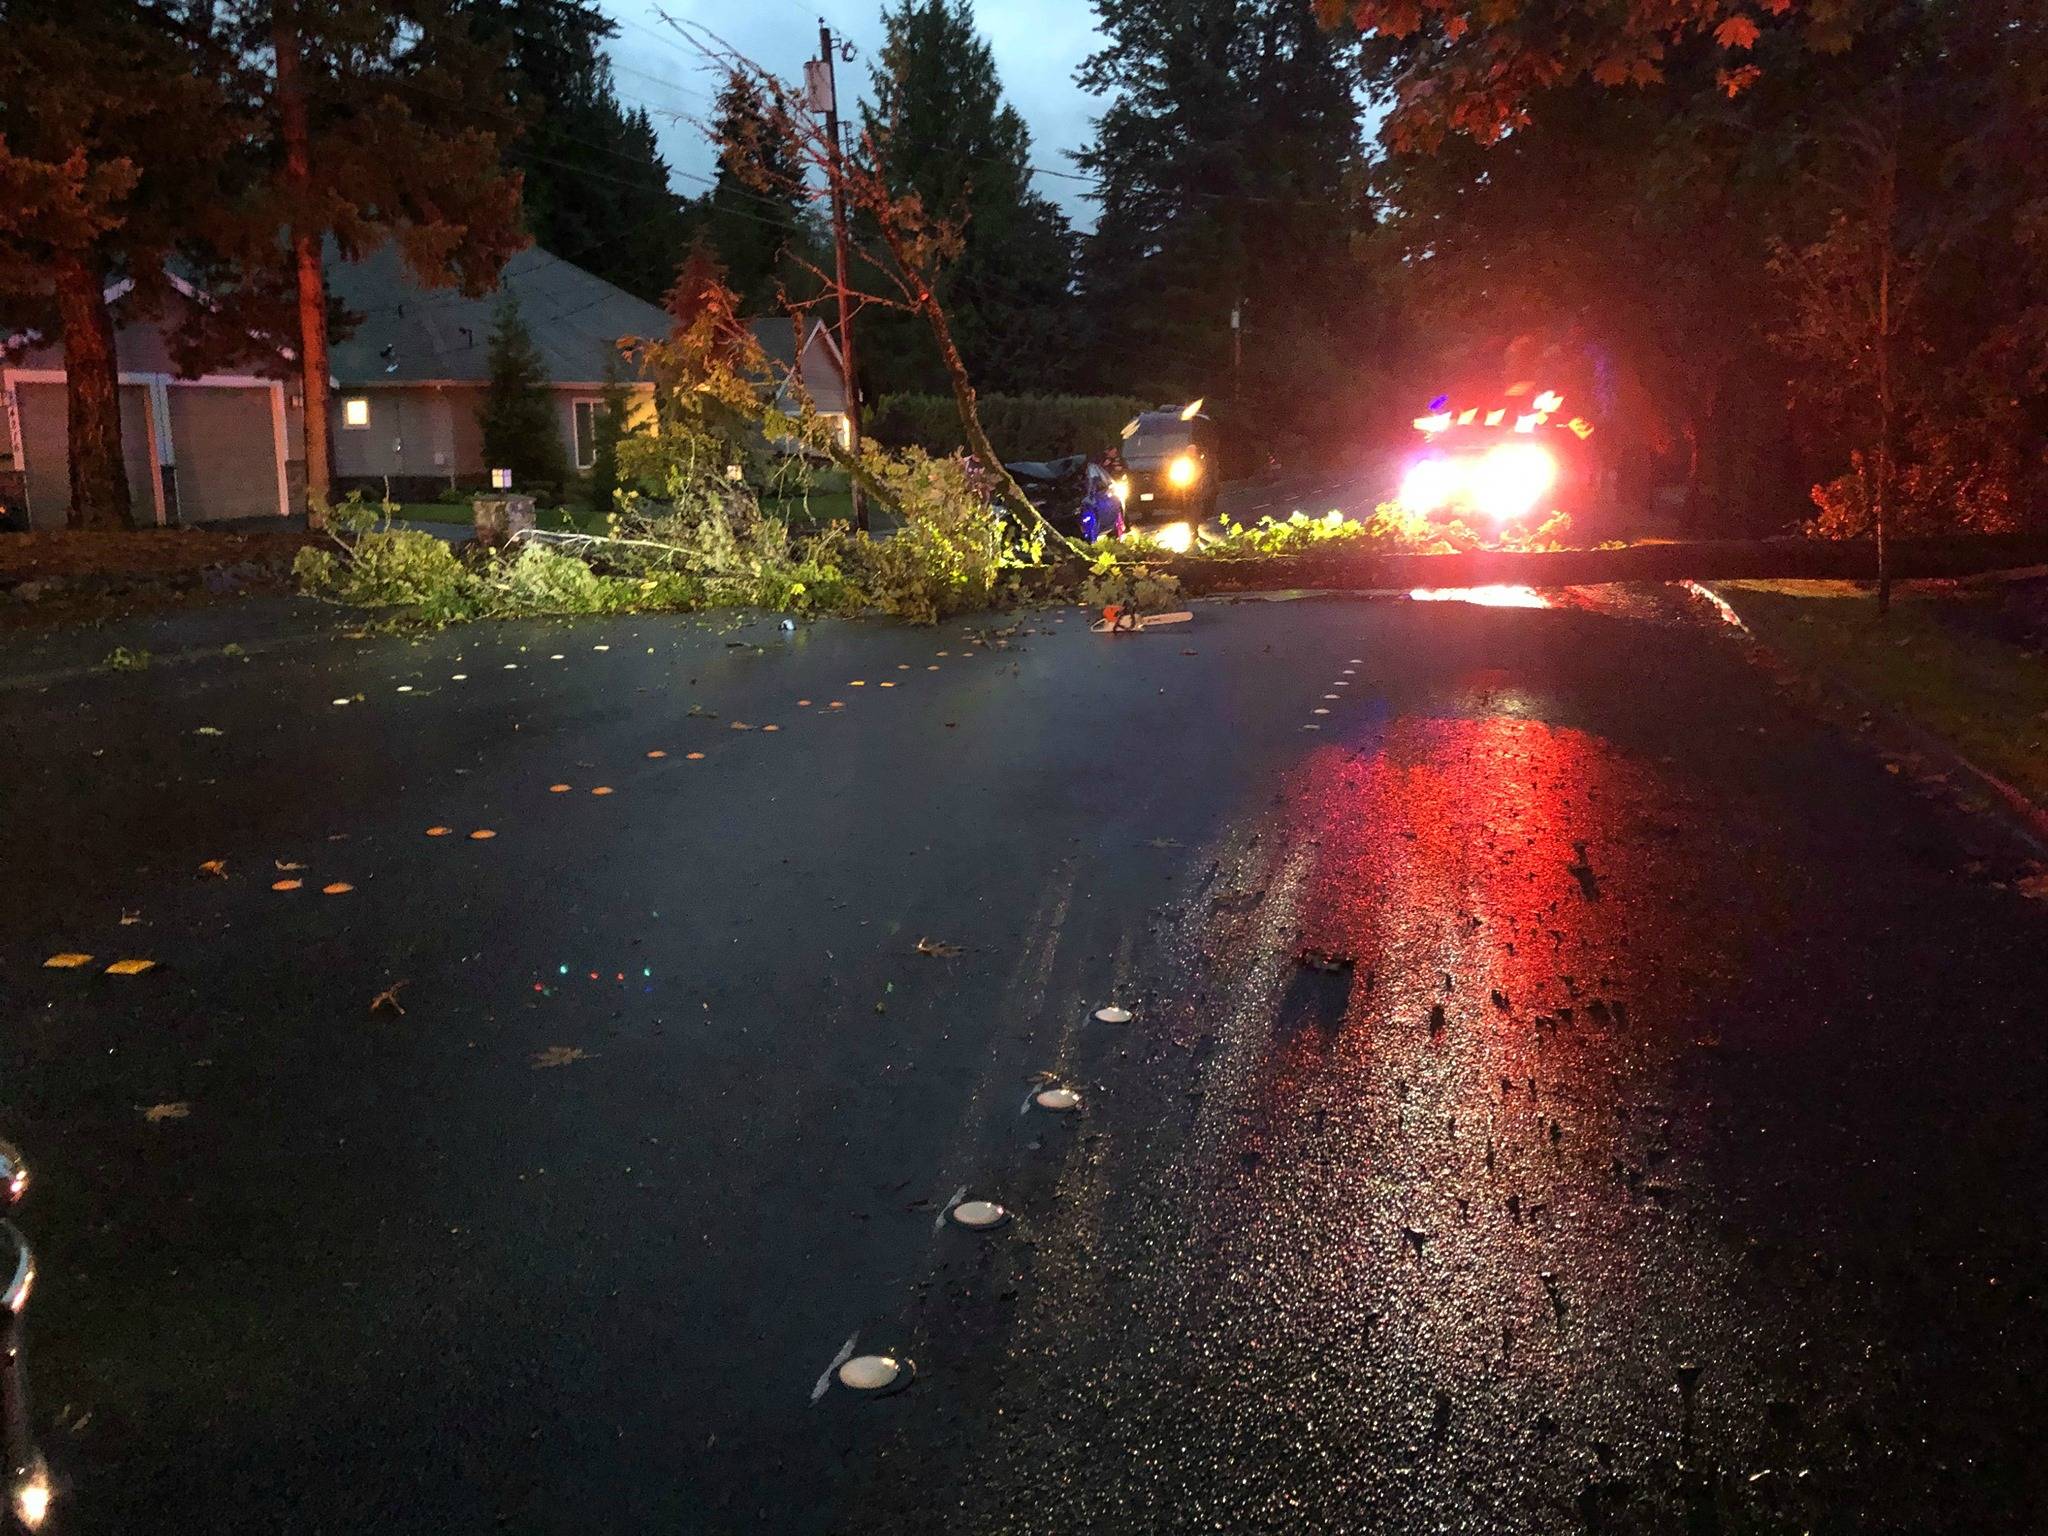 The Mercer Island Fire Department cleared a large maple tree from Island Crest Way just south of Southeast 40th Street on Oct. 10, according to the department’s Facebook page. The fallen tree blocked all lanes and struck a vehicle’s hood. The driver was uninjured. The department received a dispatch call at 7:02 a.m. and the last unit cleared the scene at 7:44 a.m., according the department. Crews used a chain saw to clear the tree from the roadway and notified the on-duty public works person so they could respond for debris clean up. A cause for the incident was not listed, but it is suspected to be wind and saturated ground from the rain. Courtesy of the Mercer Island Fire Department Facebook page